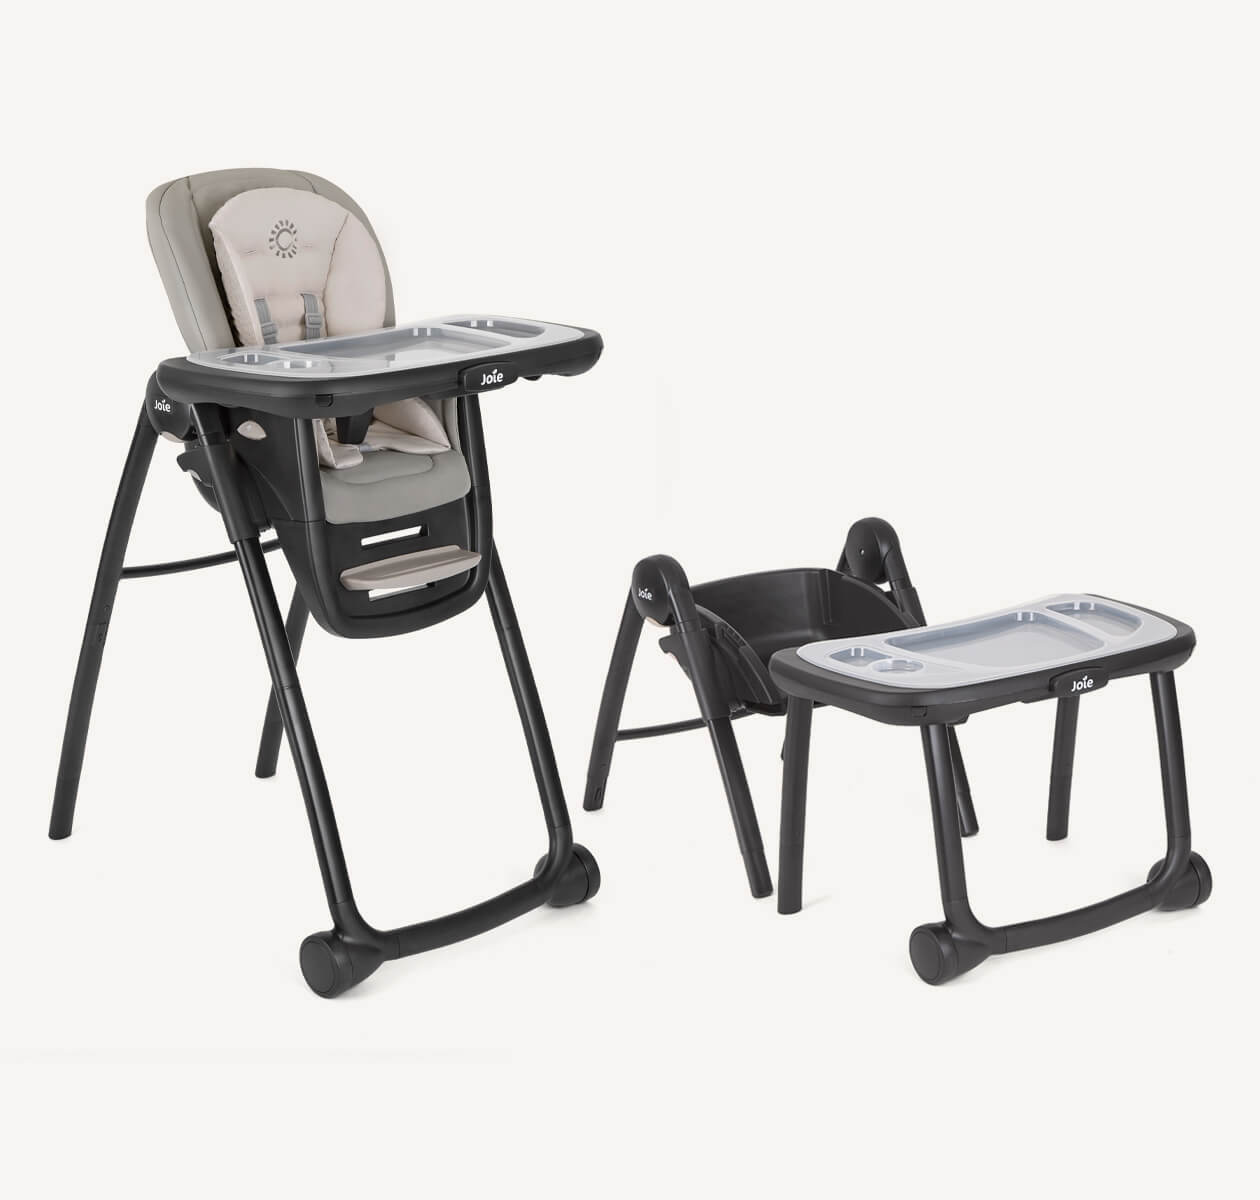 A multiply highchair with light grey and starts patterns seat, white tray with grey front wheels on a right angle.